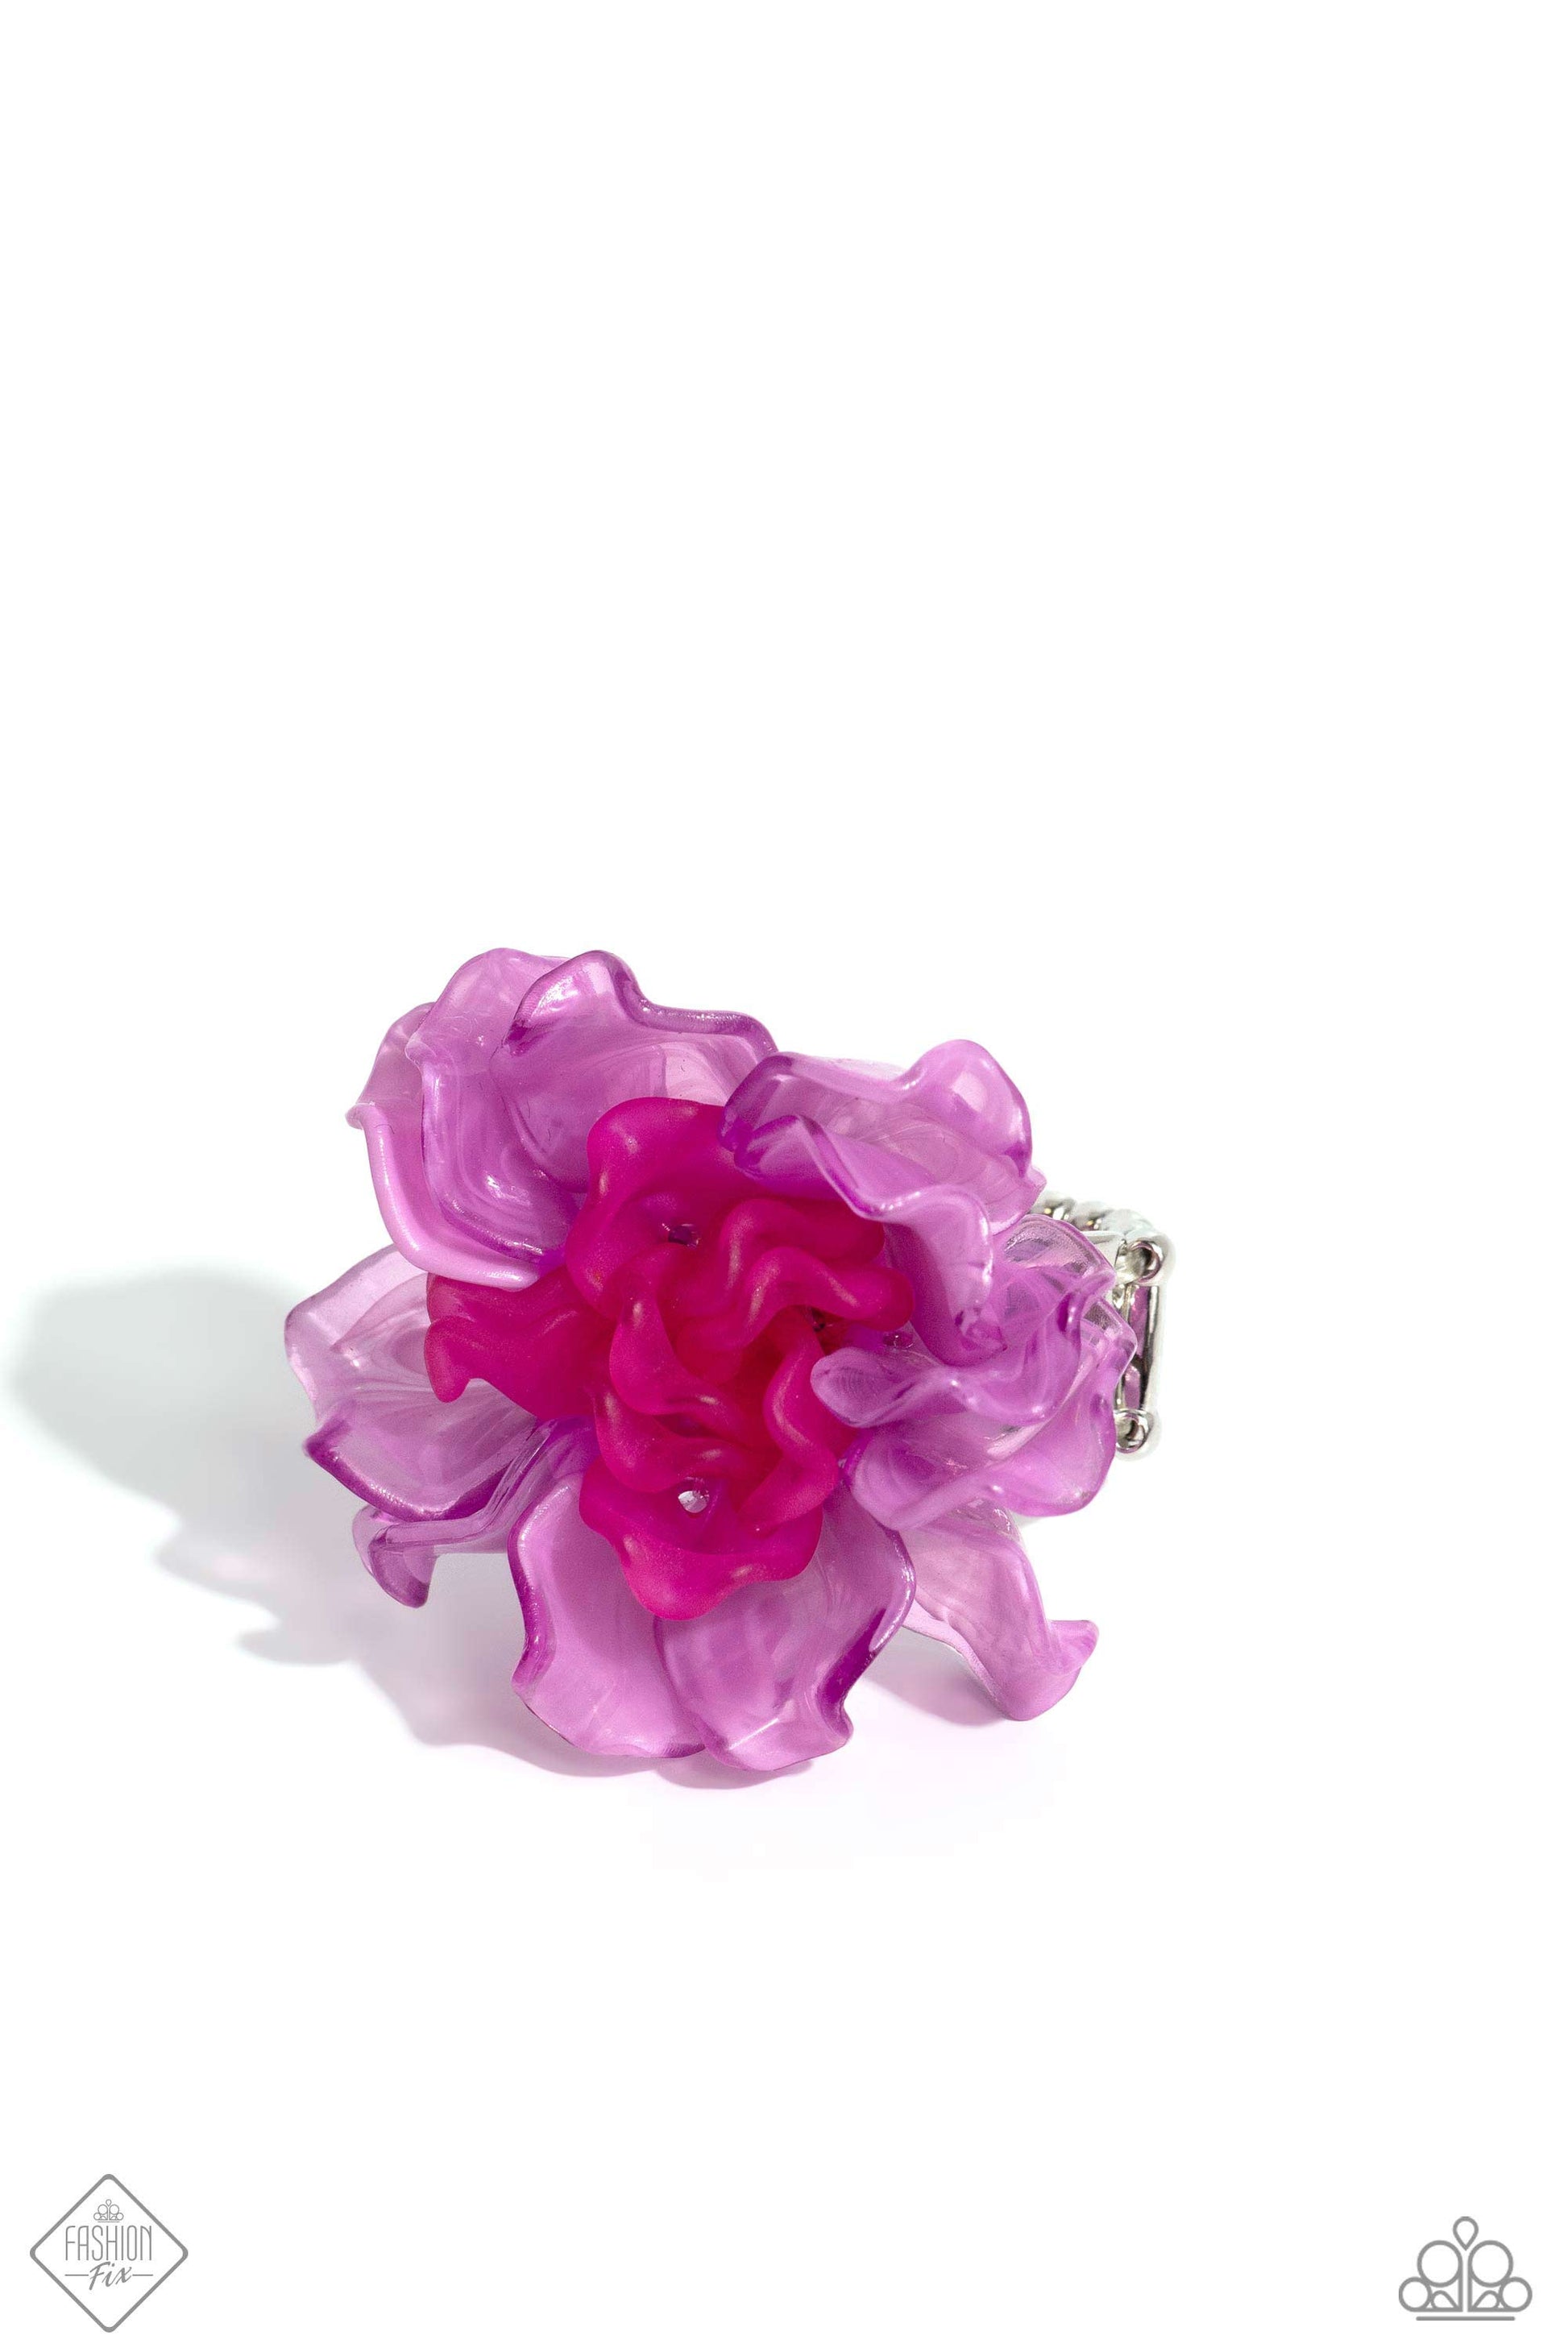 Lush Lotus Pink Ring - Paparazzi Accessories  Rippling in curved textures, cloudy Radiant Orchid petals bloom from a daintier collection of matte Viva Magenta petals atop airy silver bands for a whimsical, oversized display. Features a stretchy band for a flexible fit.  Sold as one individual ring.  Sku:  P4WH-PKXX-258SB